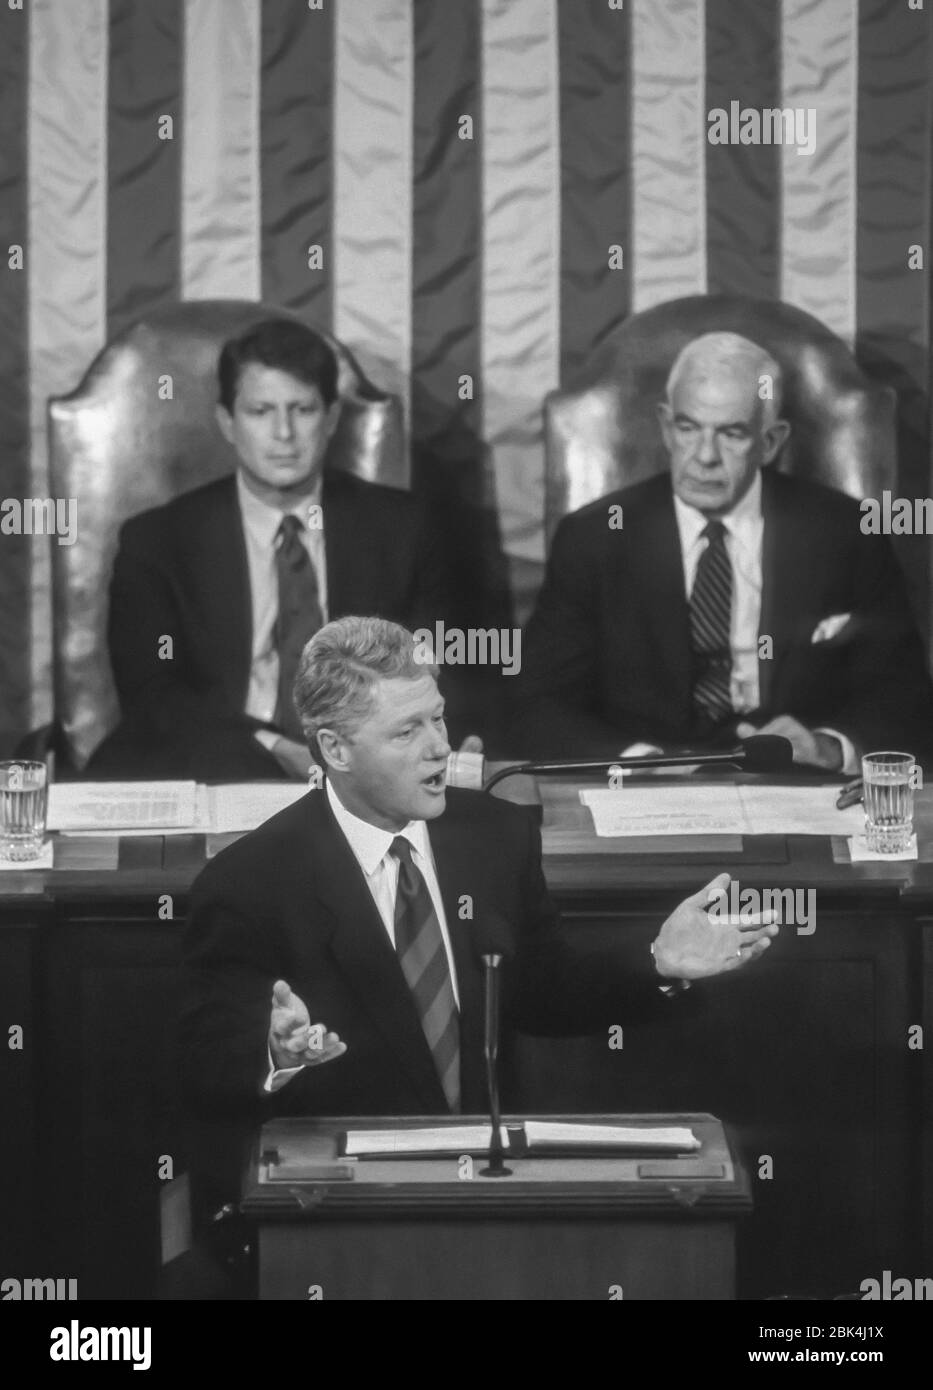 WASHINGTON, DC, USA - SEPTEMBER 22, 1993: President Bill Clinton speaks before joint session of Congress on health care. Behind him are V-P Al Gore, left, and Speaker Tom Foley. Stock Photo